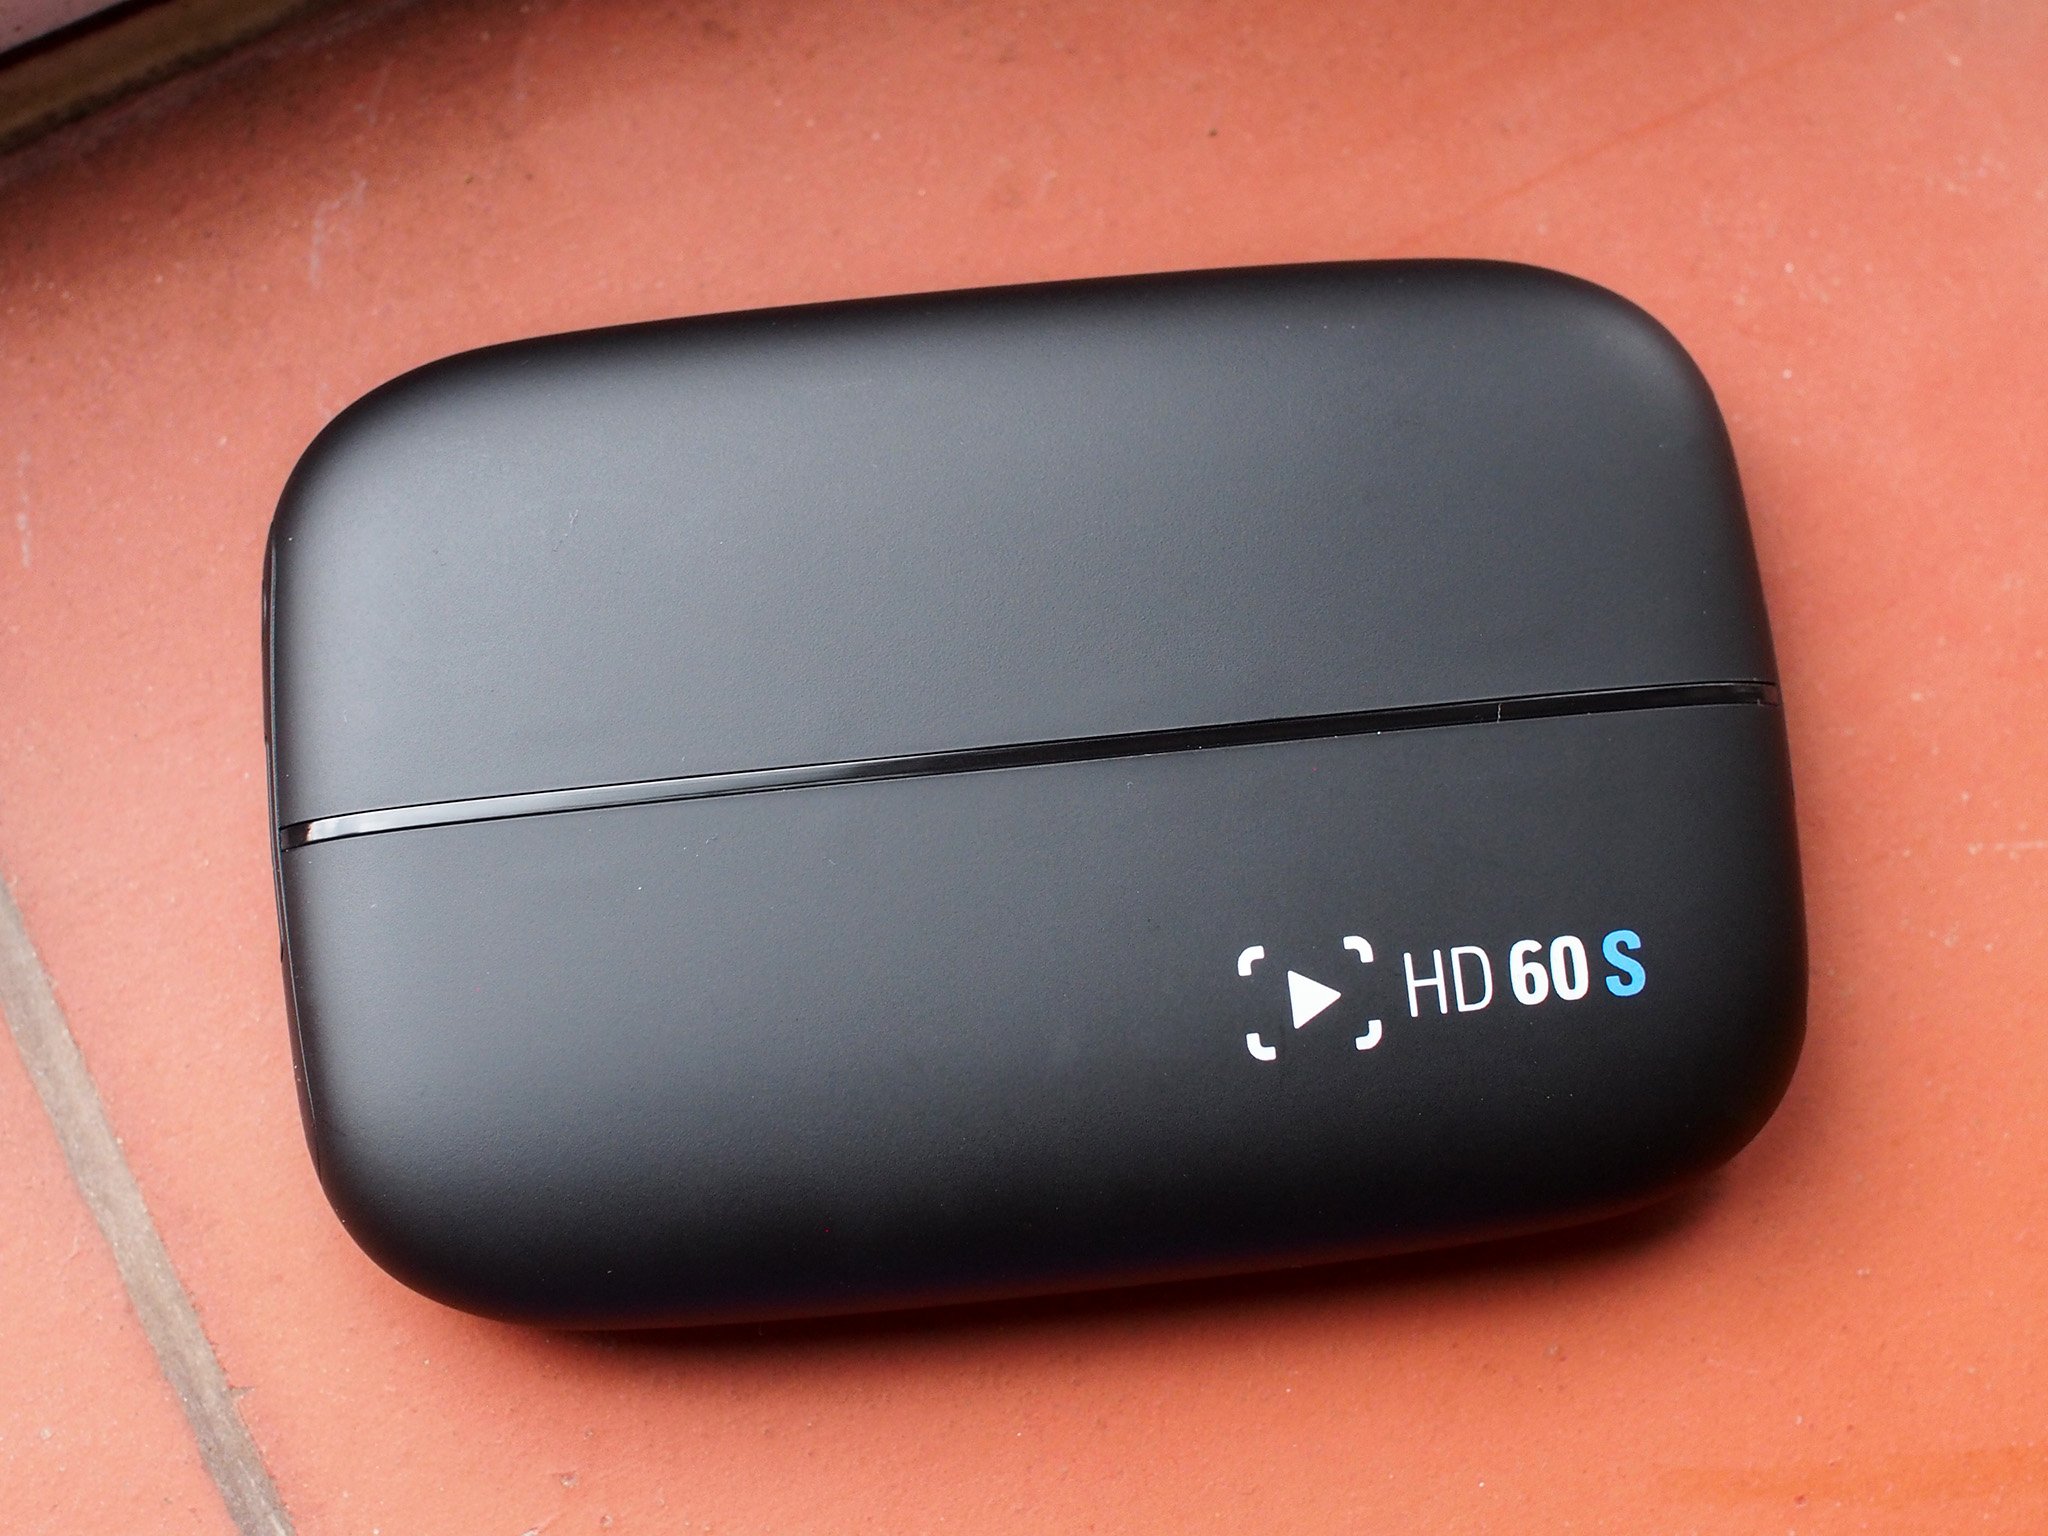 Elgato HD60 vs HD60 S: What's the difference?